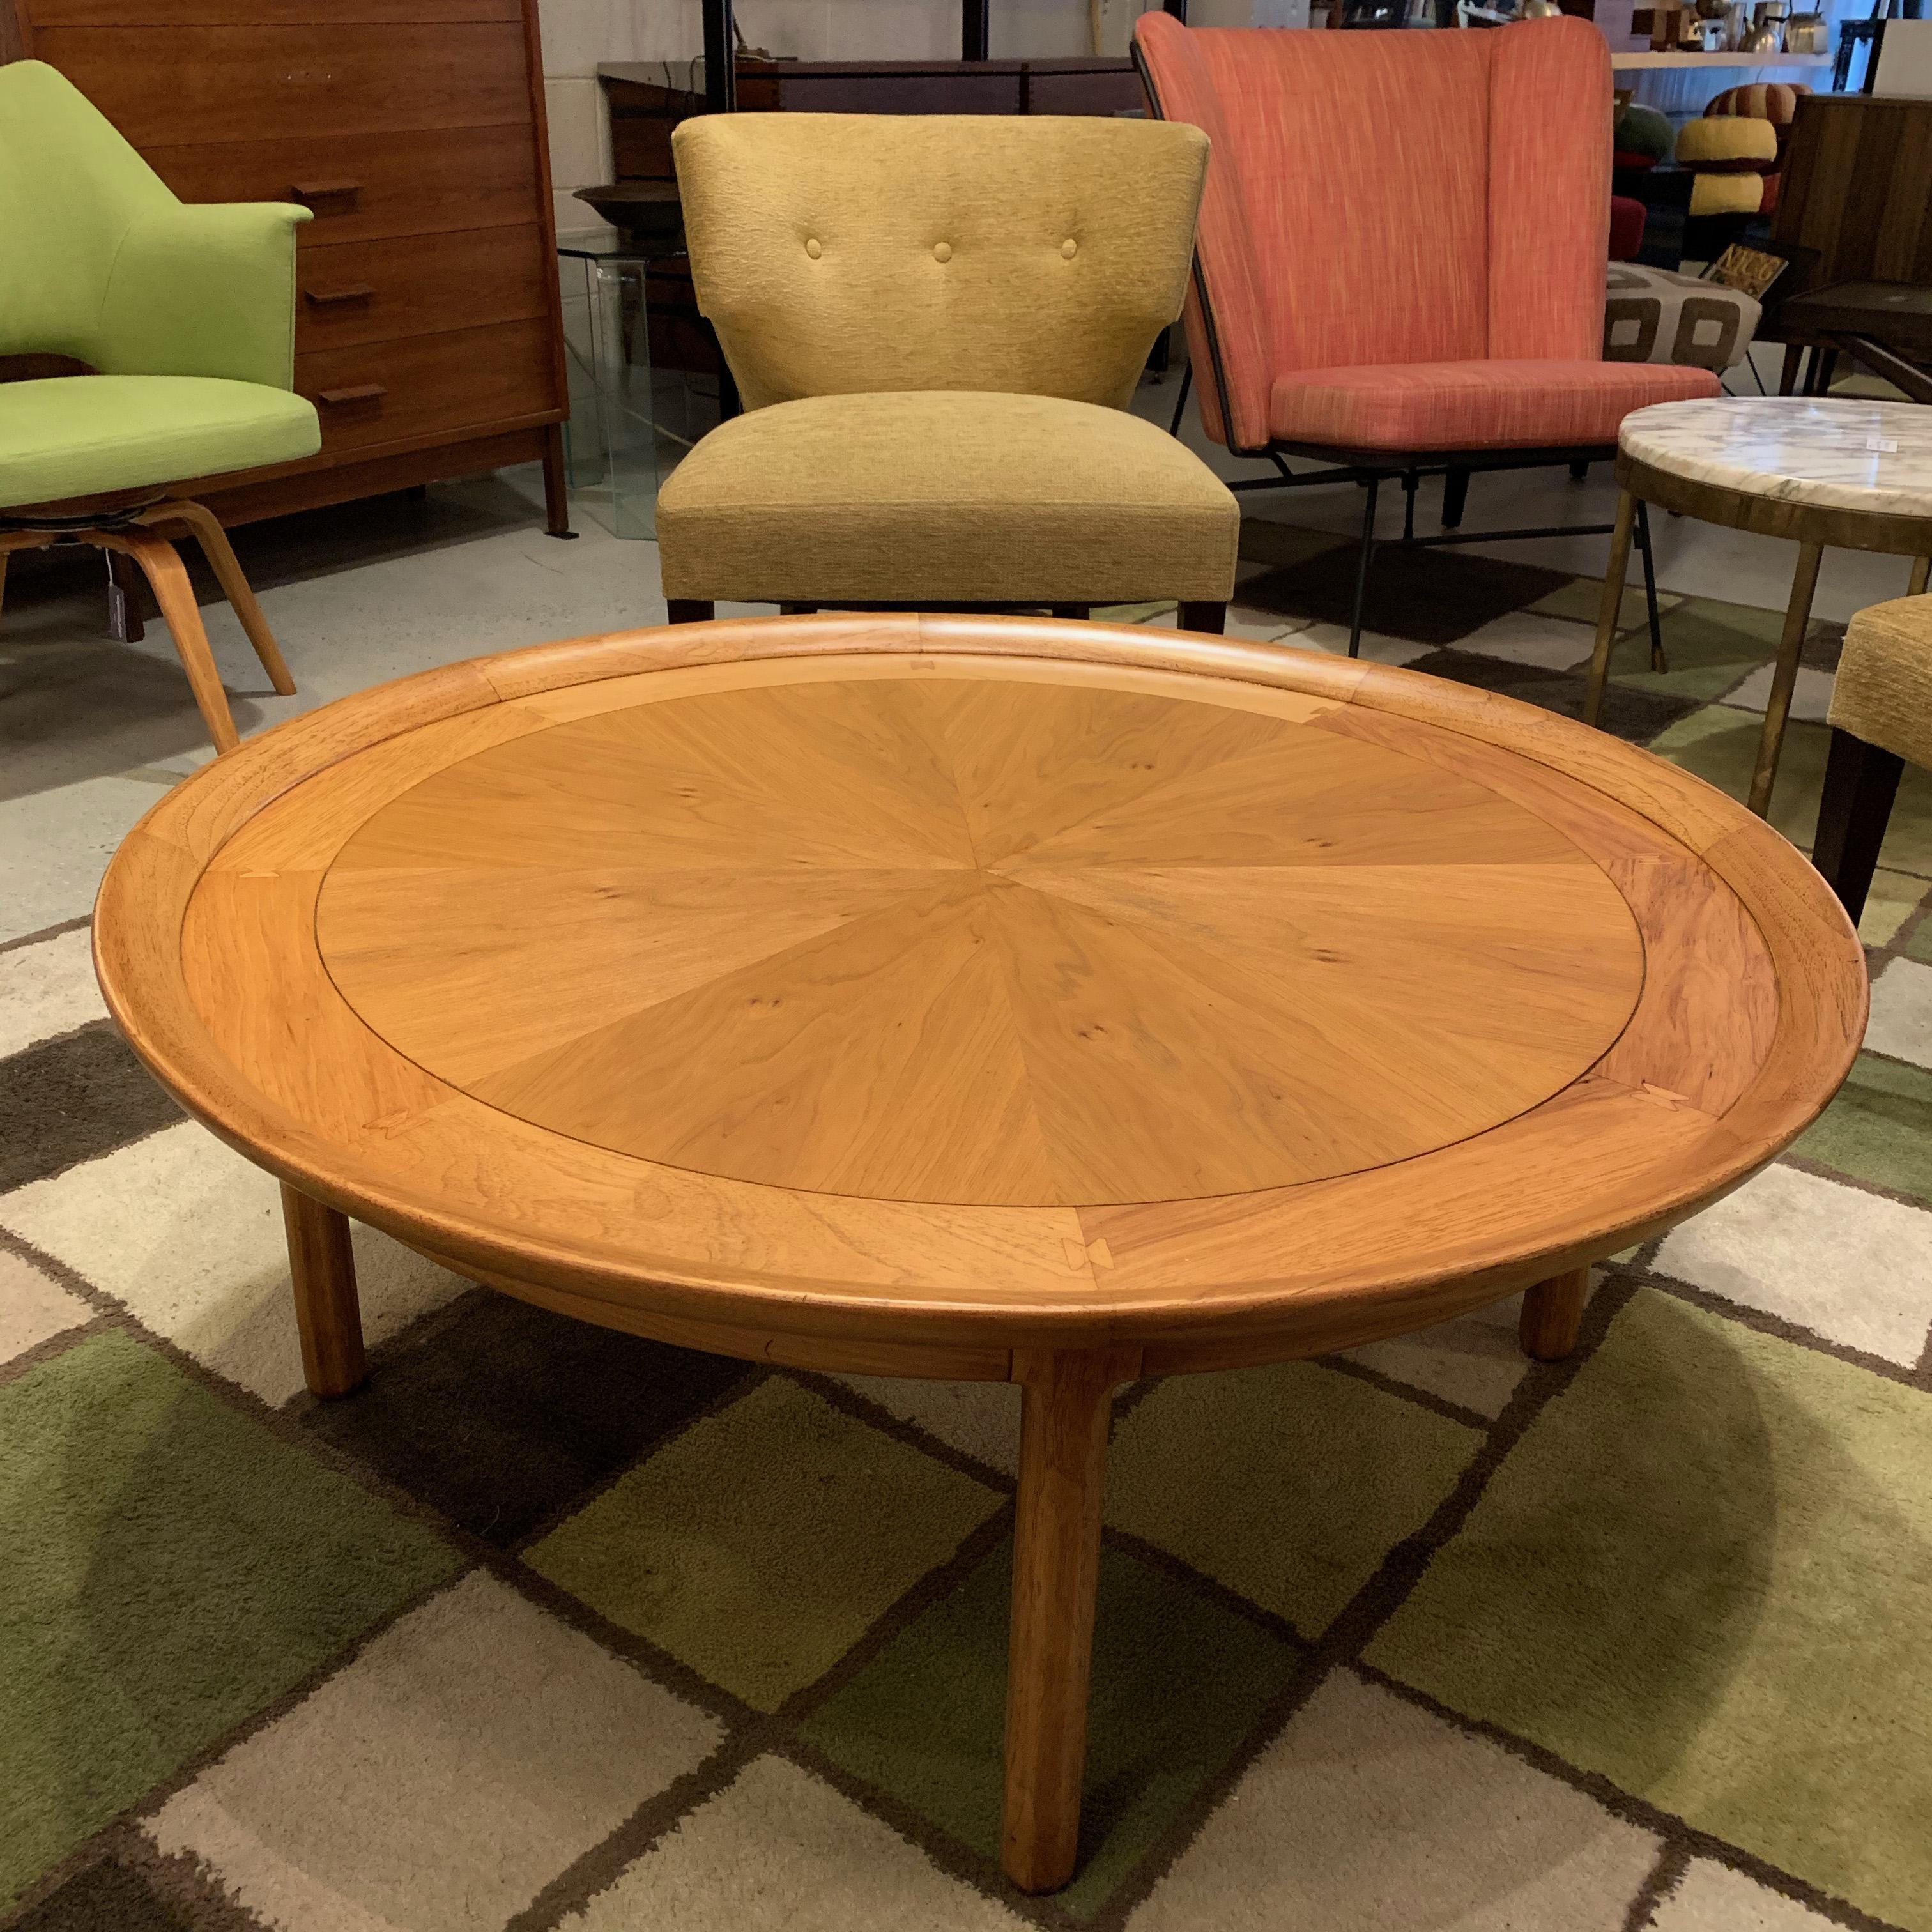 Lovely, Mid-Century Modern, round coffee table by Sophisticate by Tomlinson features a recessed top with sunburst pattern, bookmatched pecan and butternut wood top with butterfly joinery.